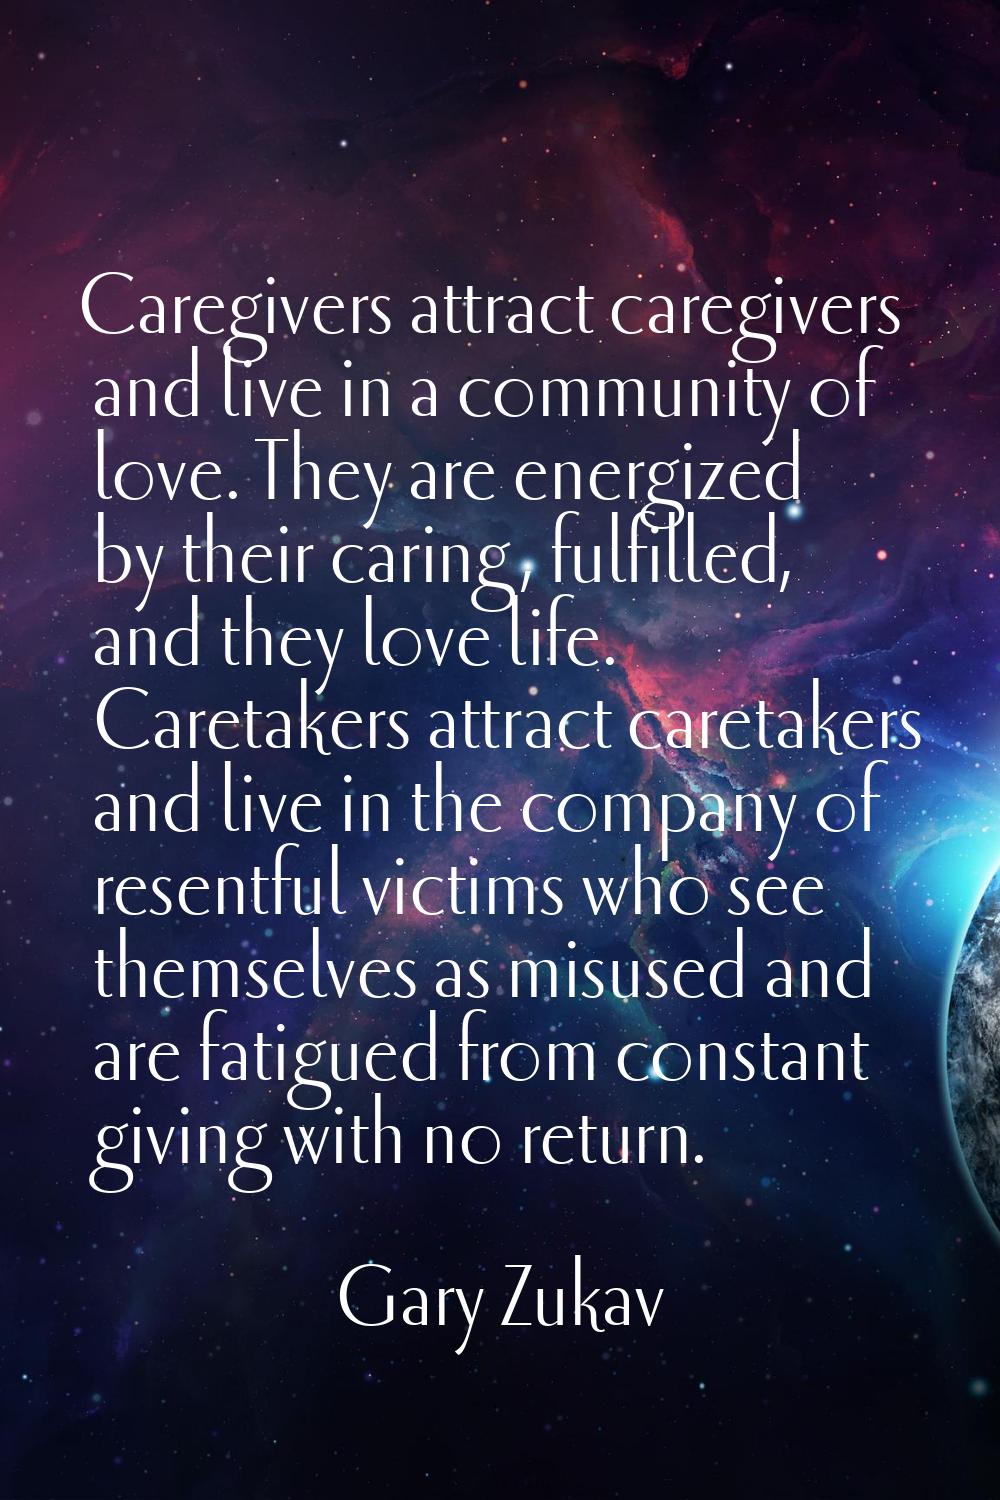 Caregivers attract caregivers and live in a community of love. They are energized by their caring, 